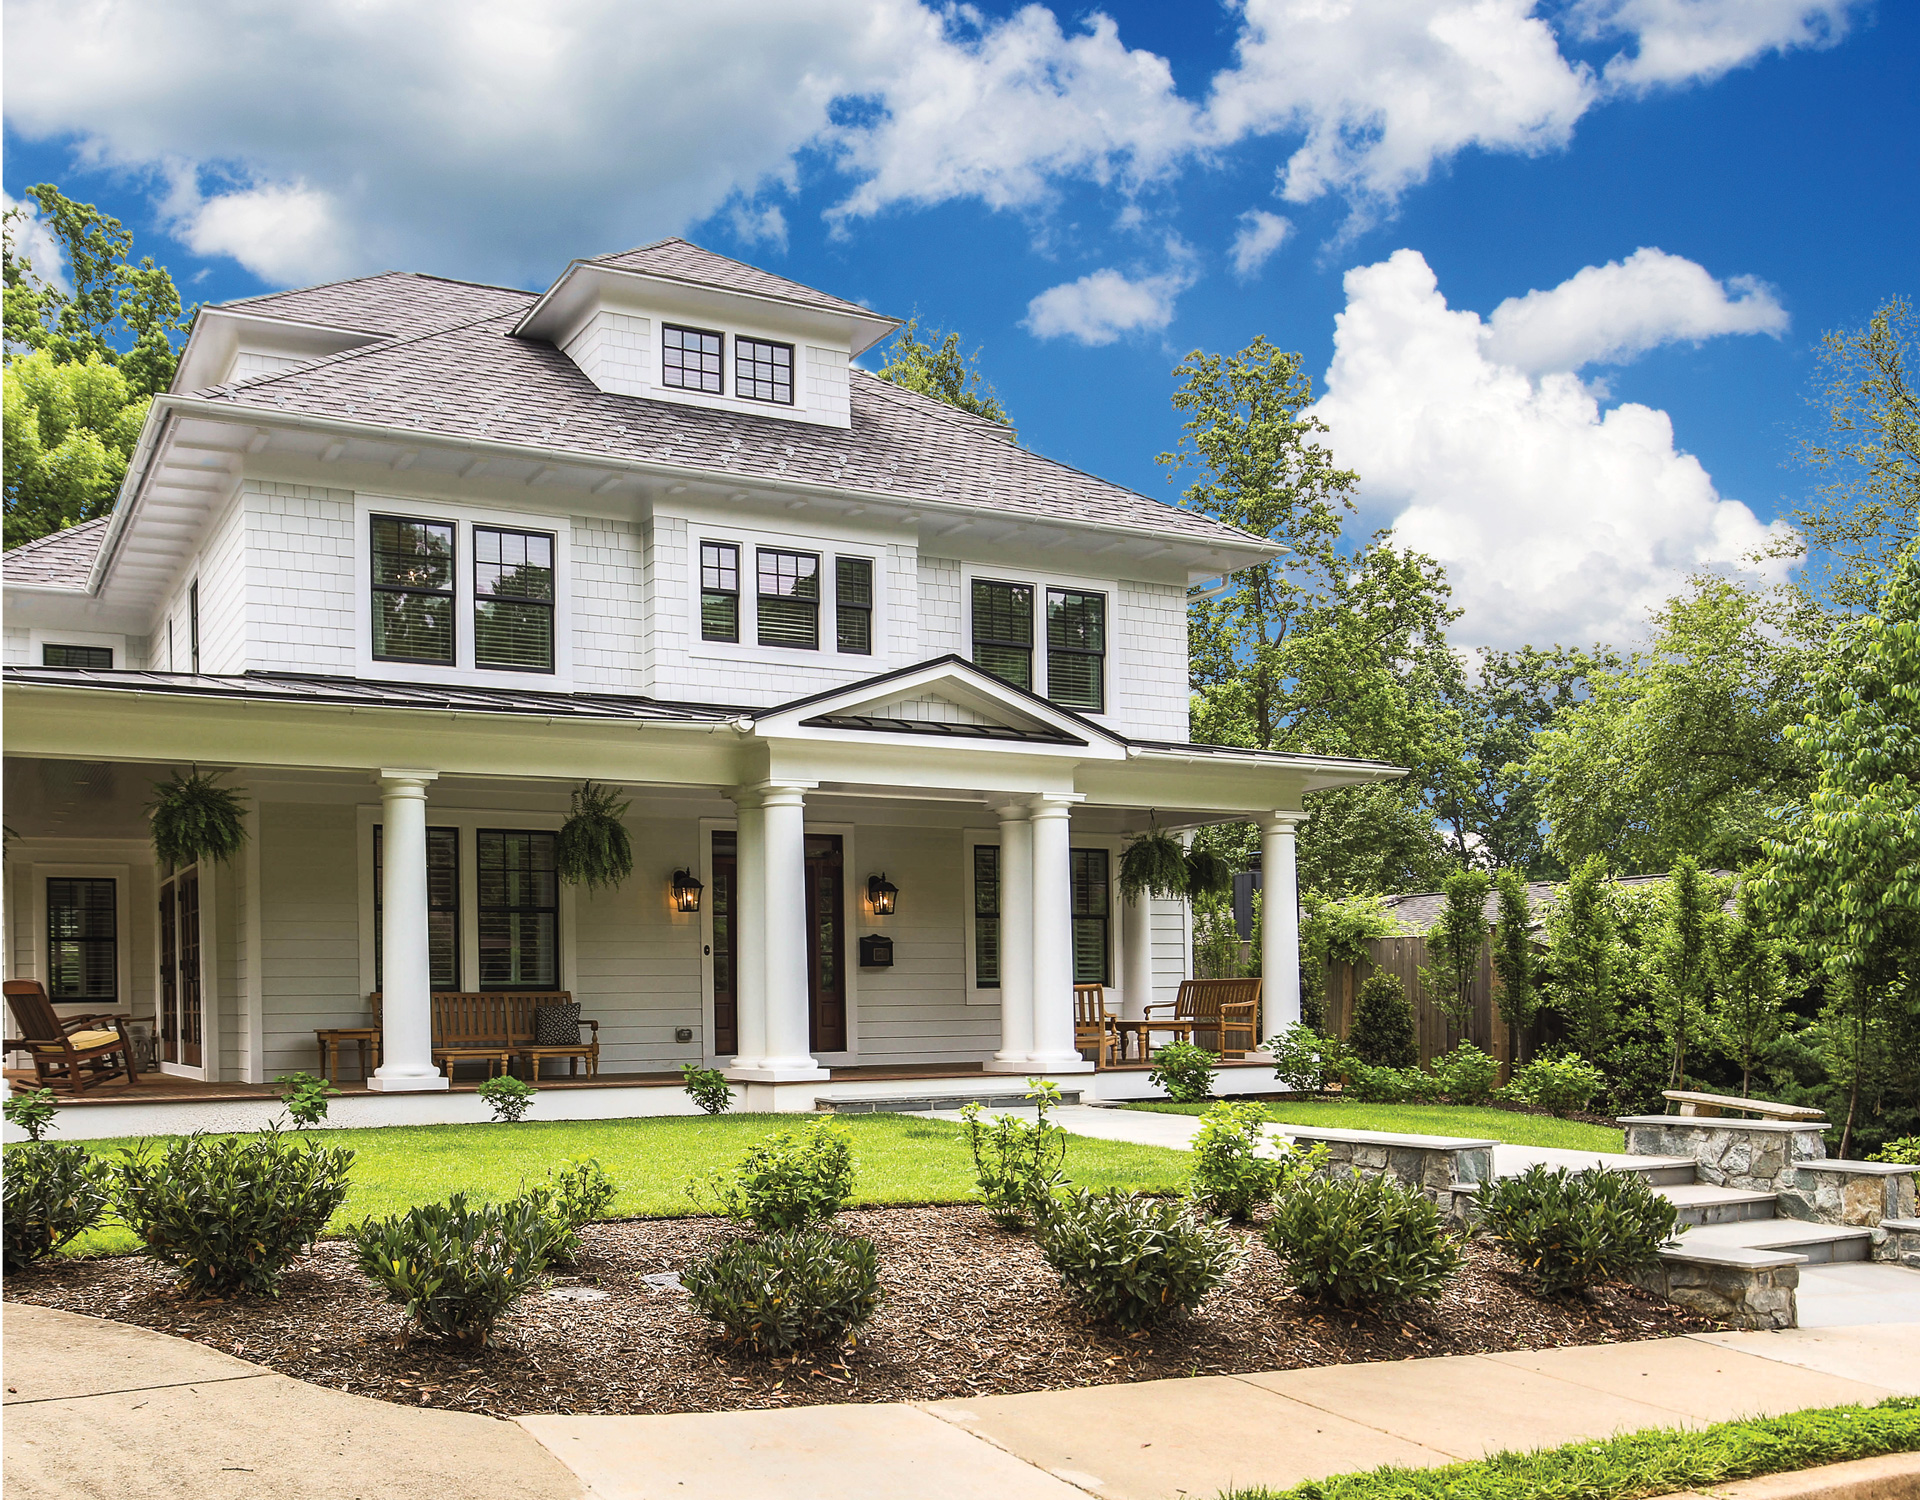 White exterior on a classic southern home